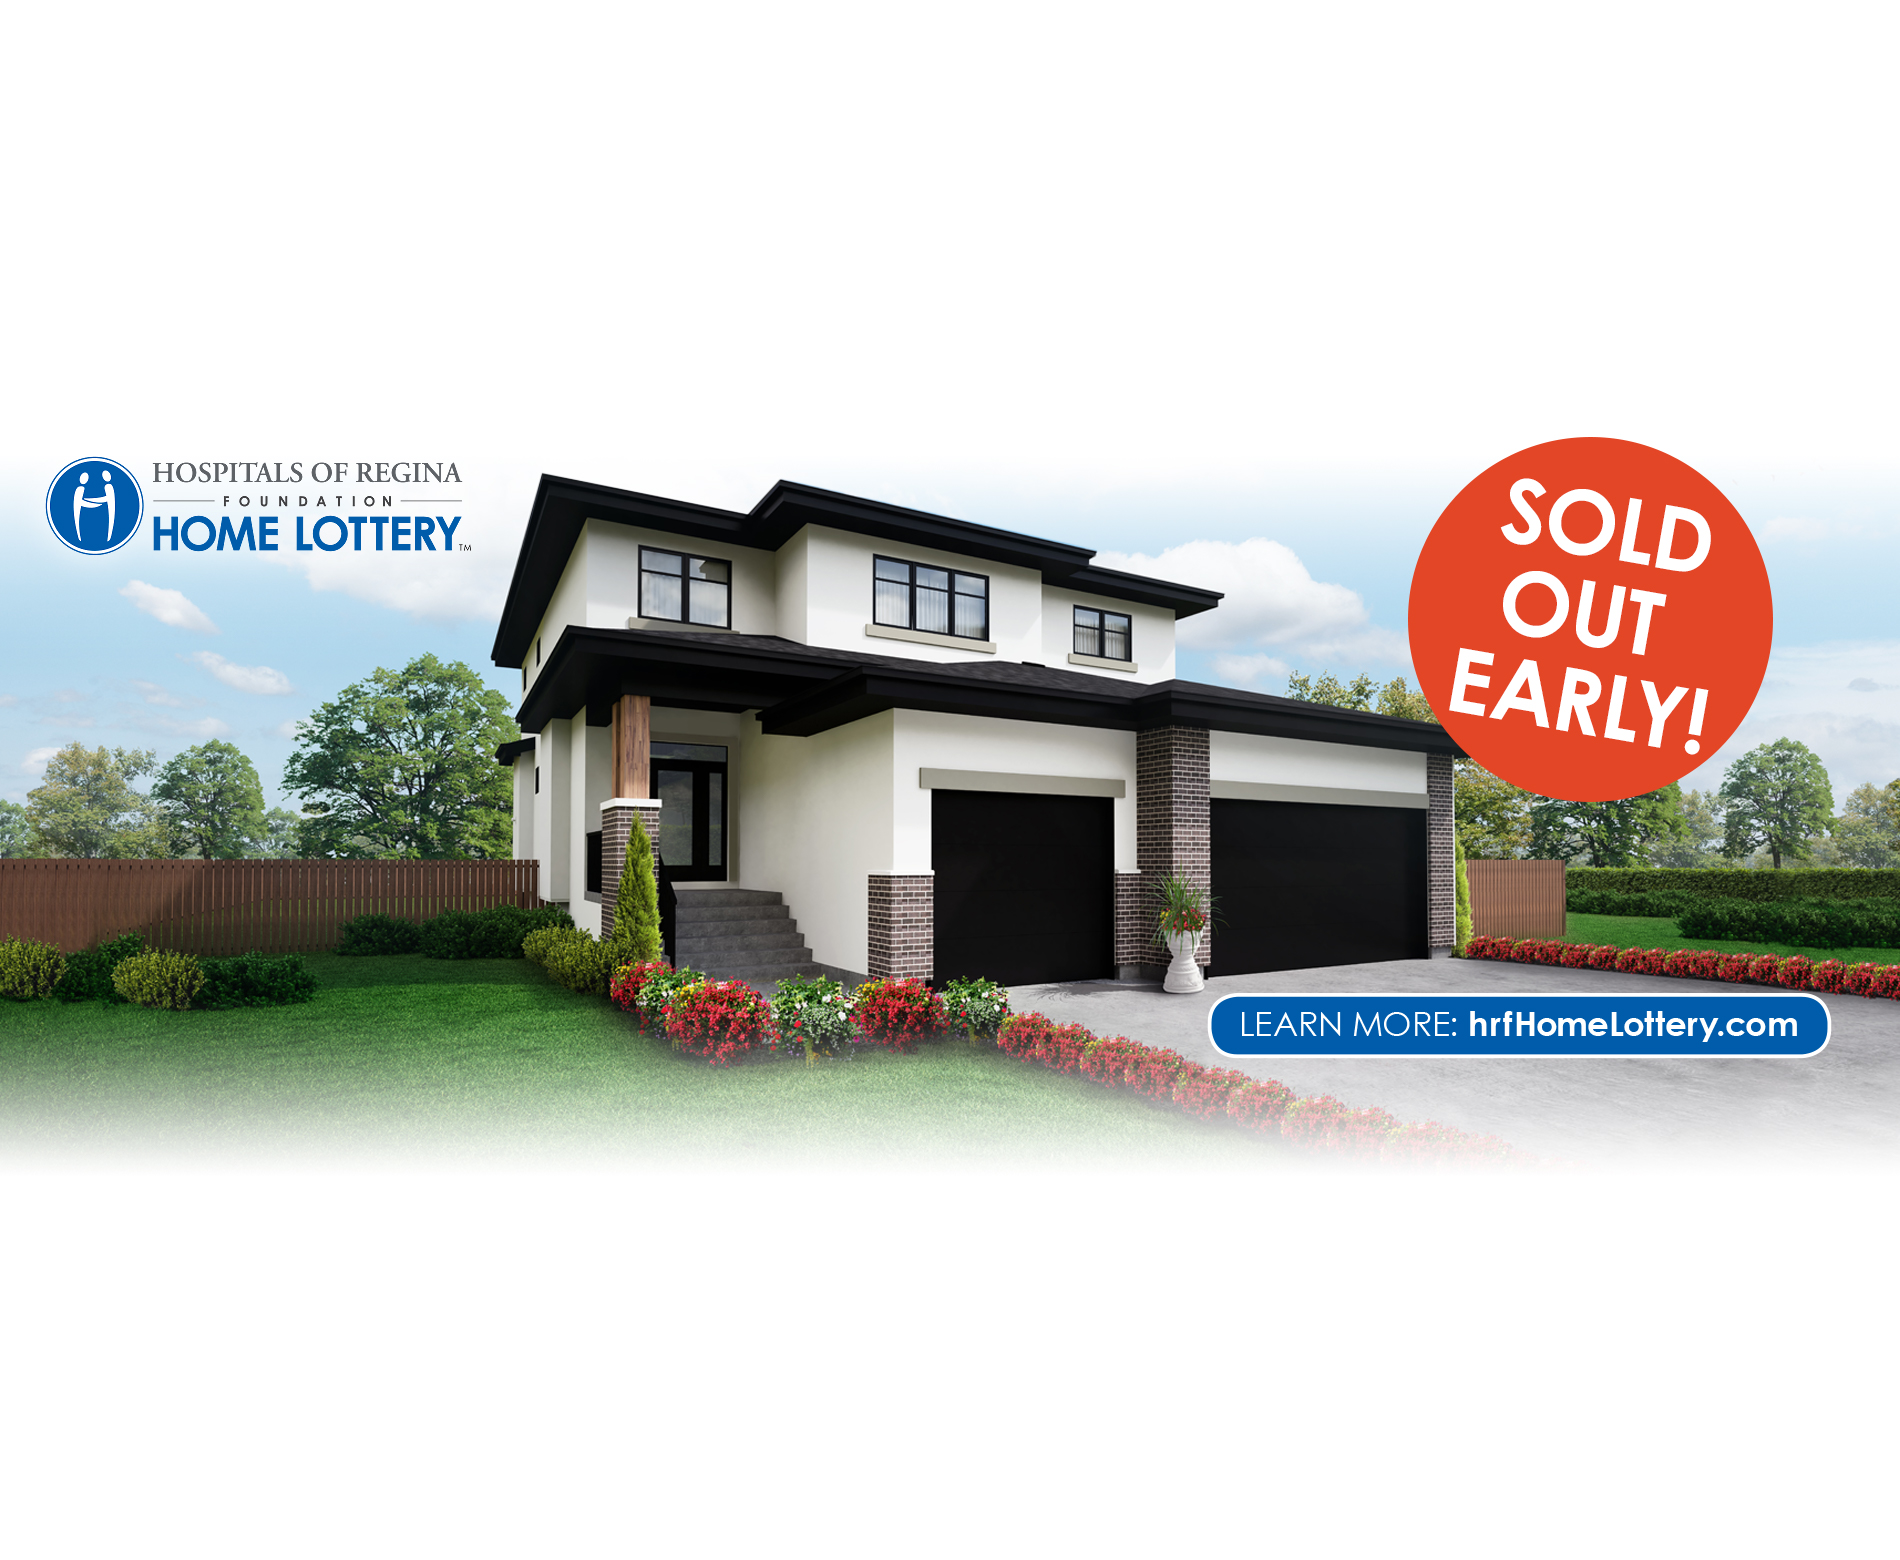 Hospitals of Regina Foundation Fall 2018 Home Lottery has sold out early